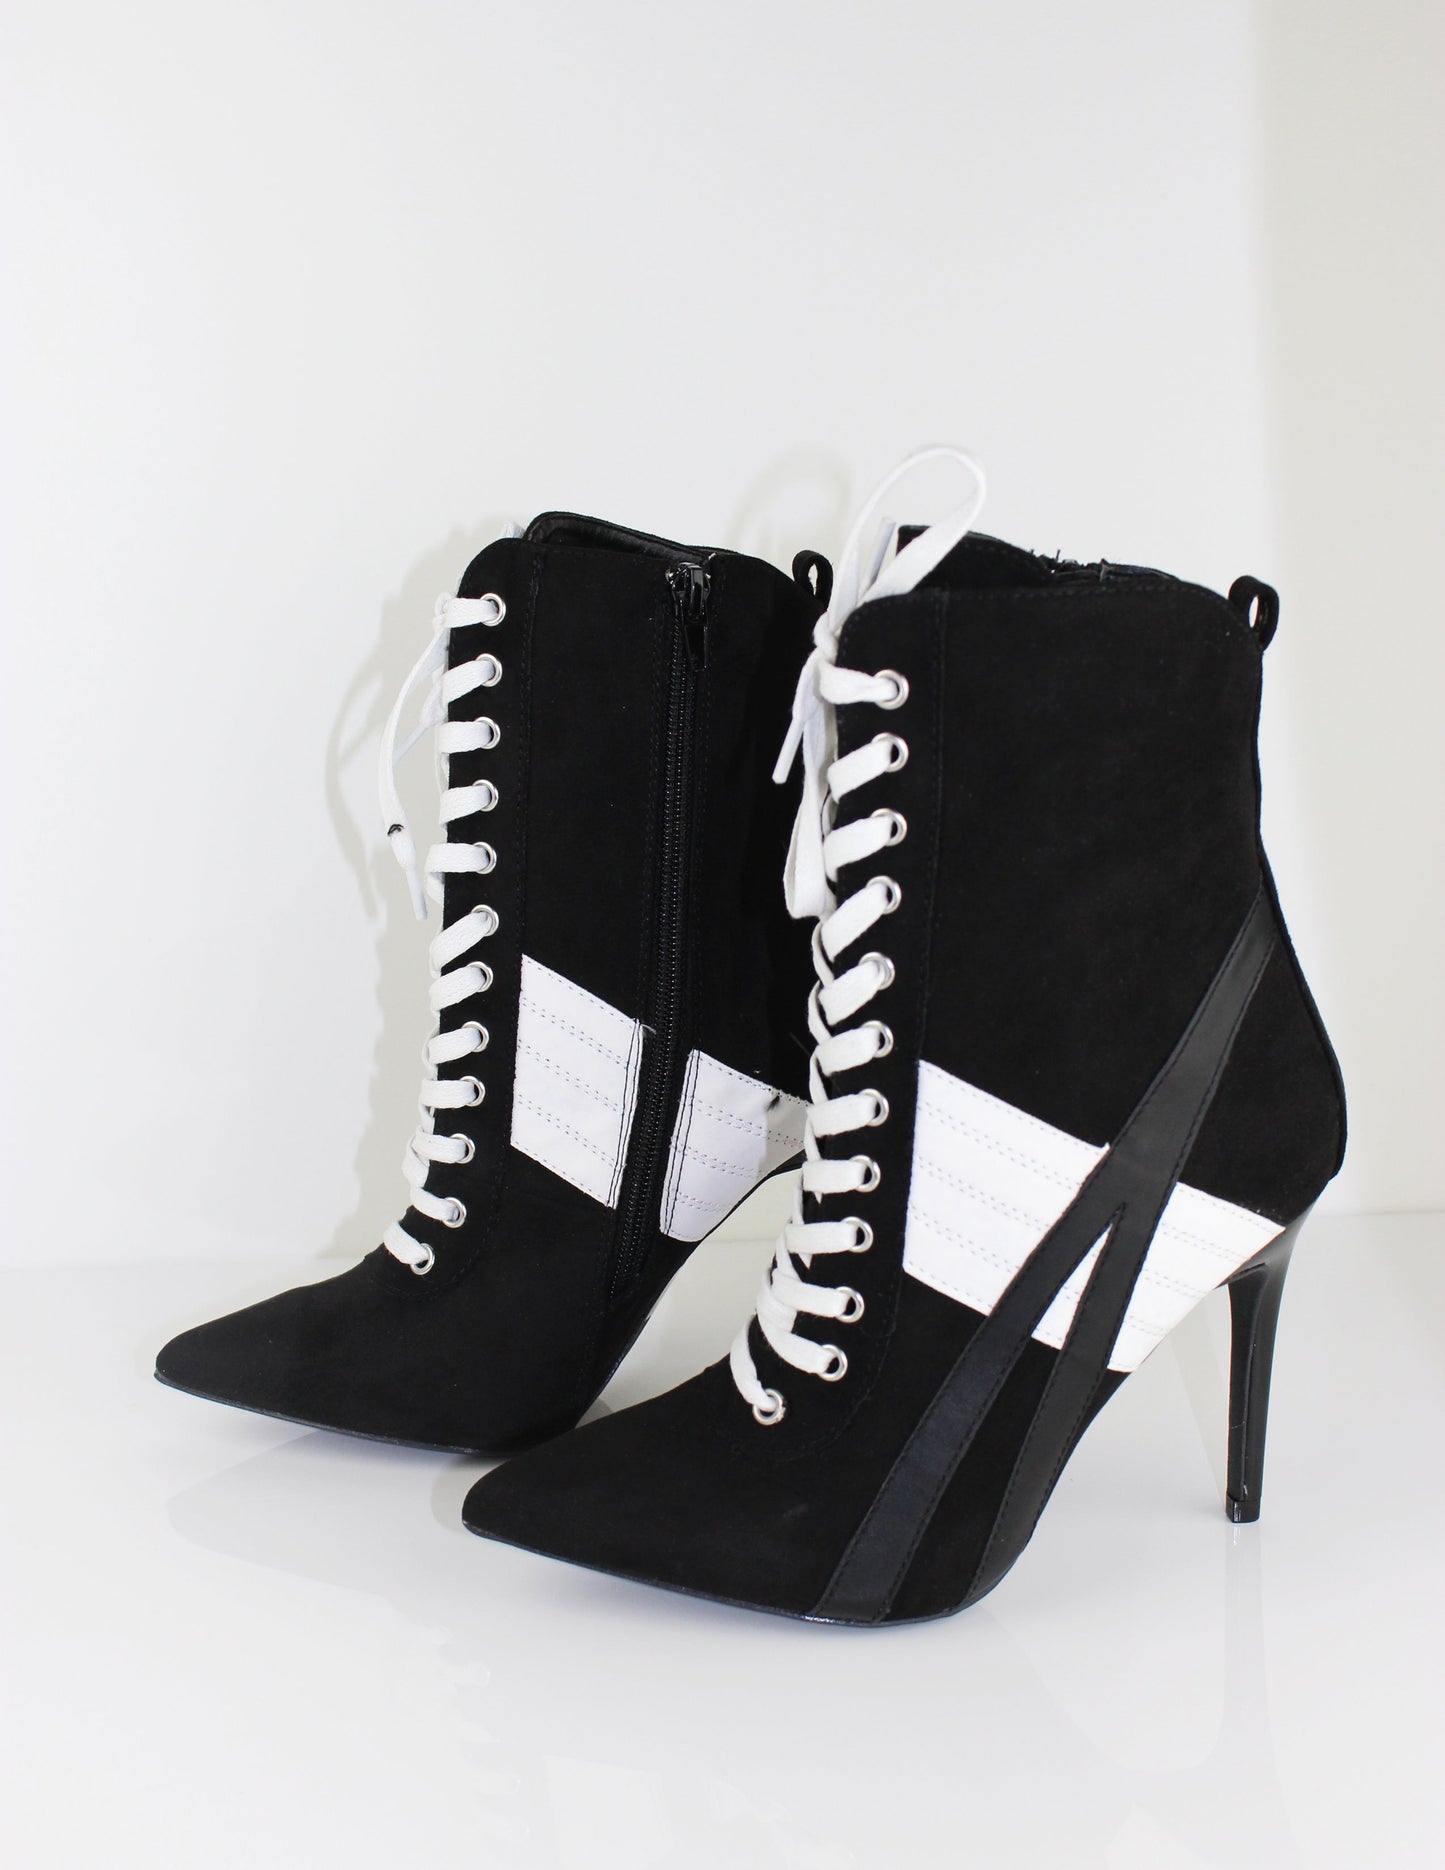 black and White vegan leather high heel shoes sneakers